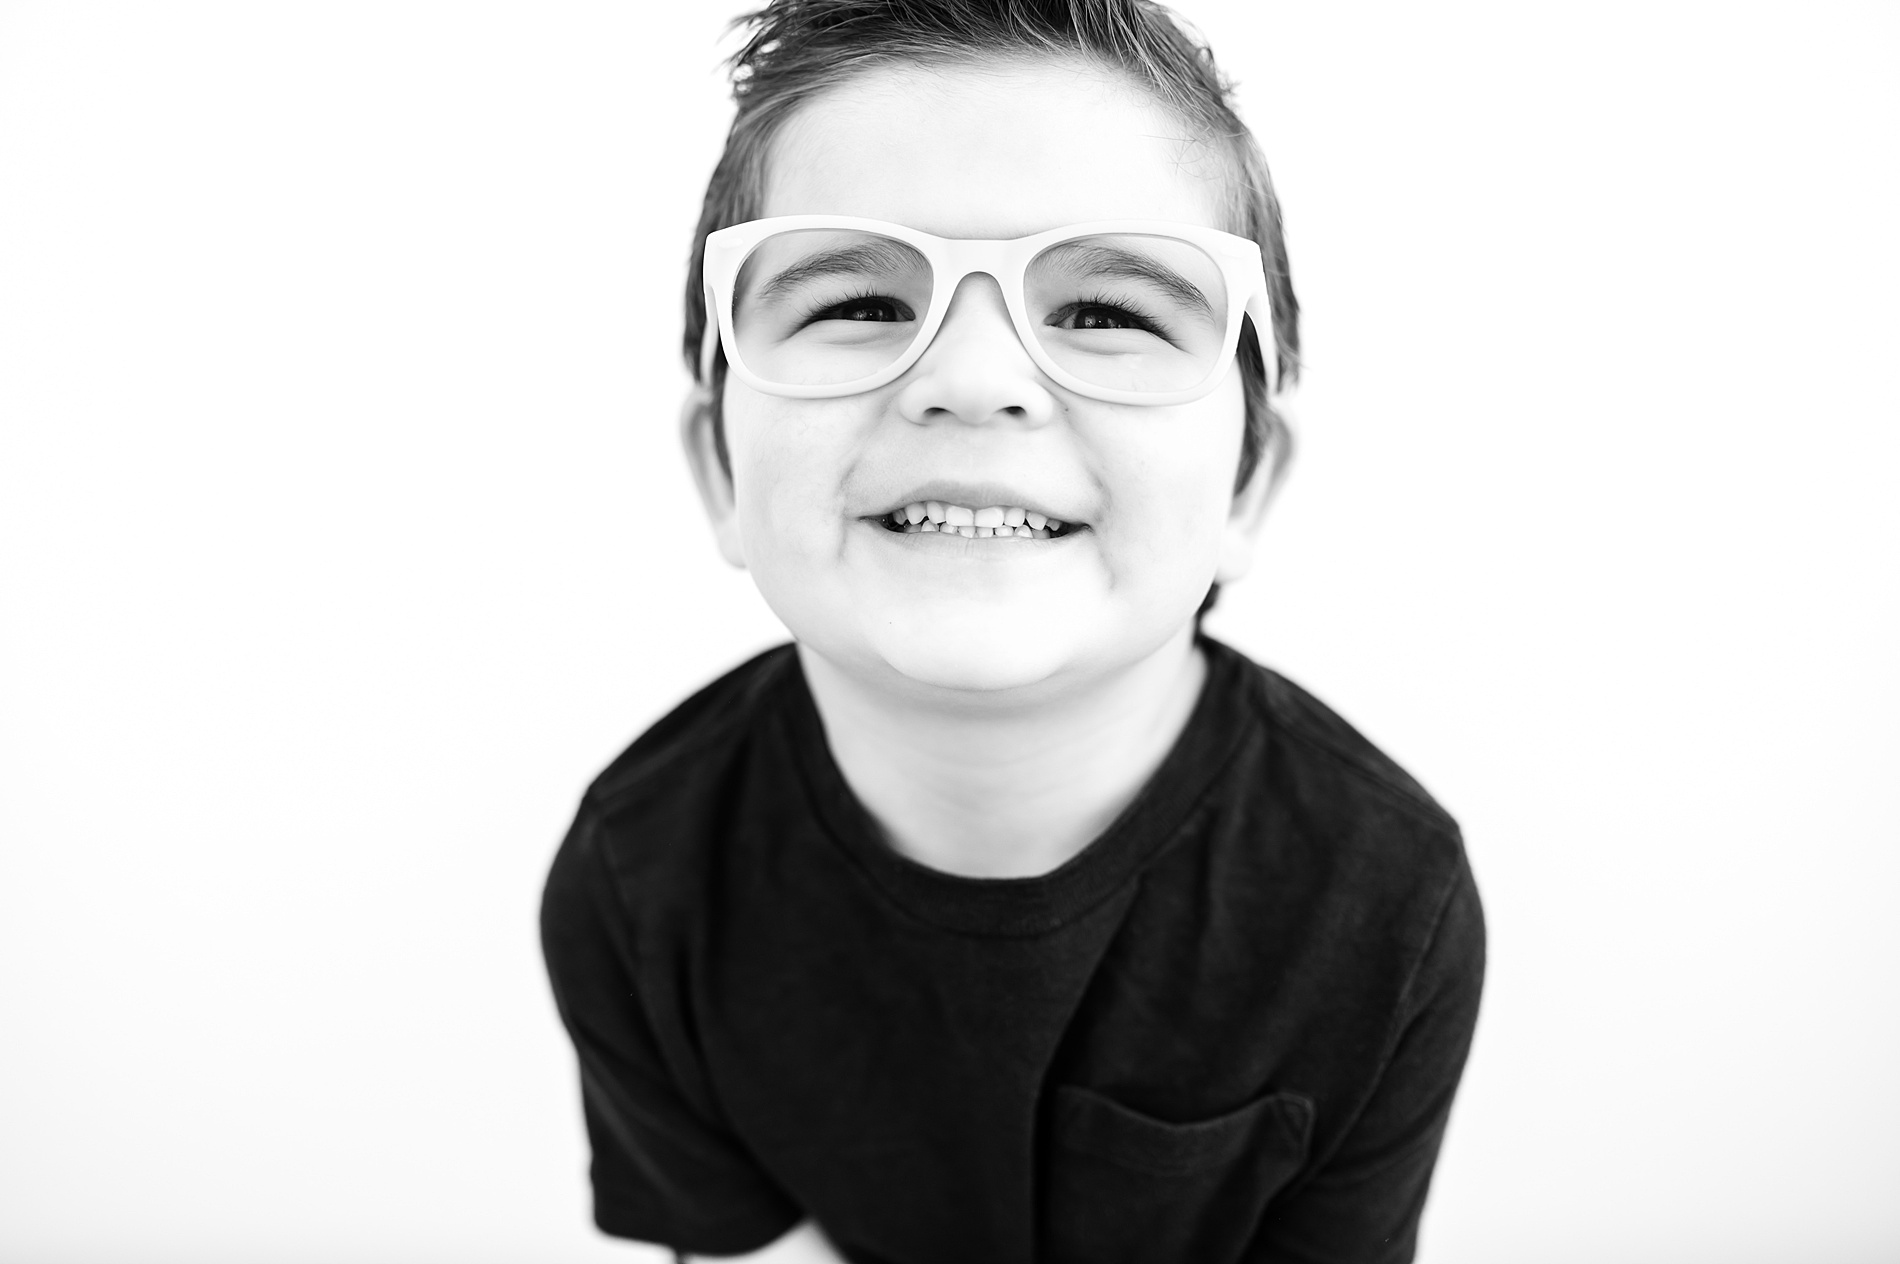 Black and White children personality Portraits photographed by Lindsey Dutton Photography, a Dallas family photographer
